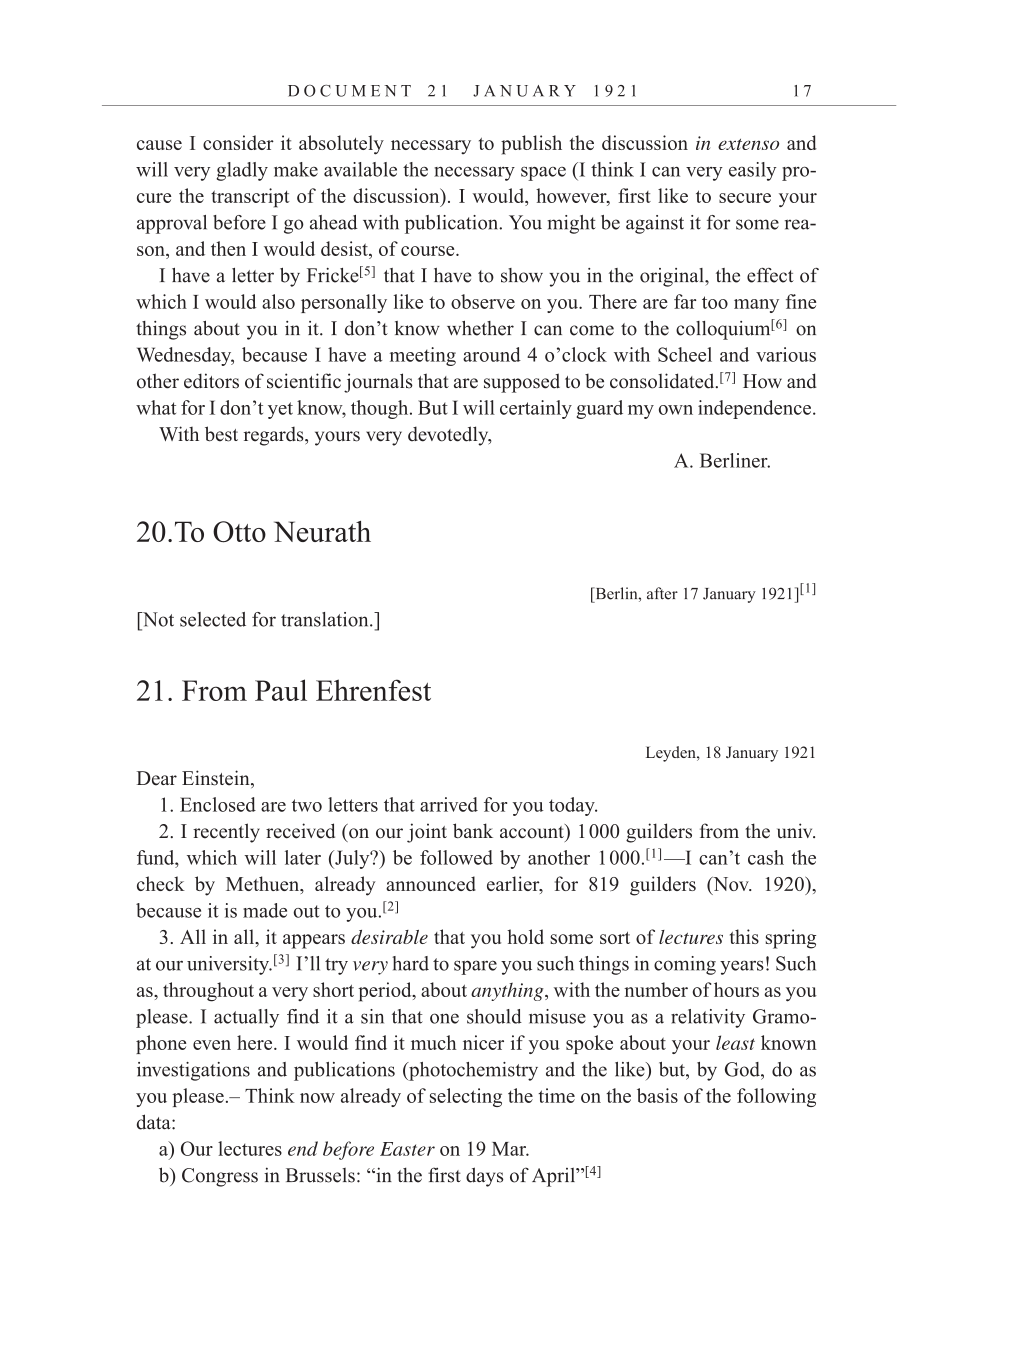 Volume 12: The Berlin Years: Correspondence, January-December 1921 (English translation supplement) page 17